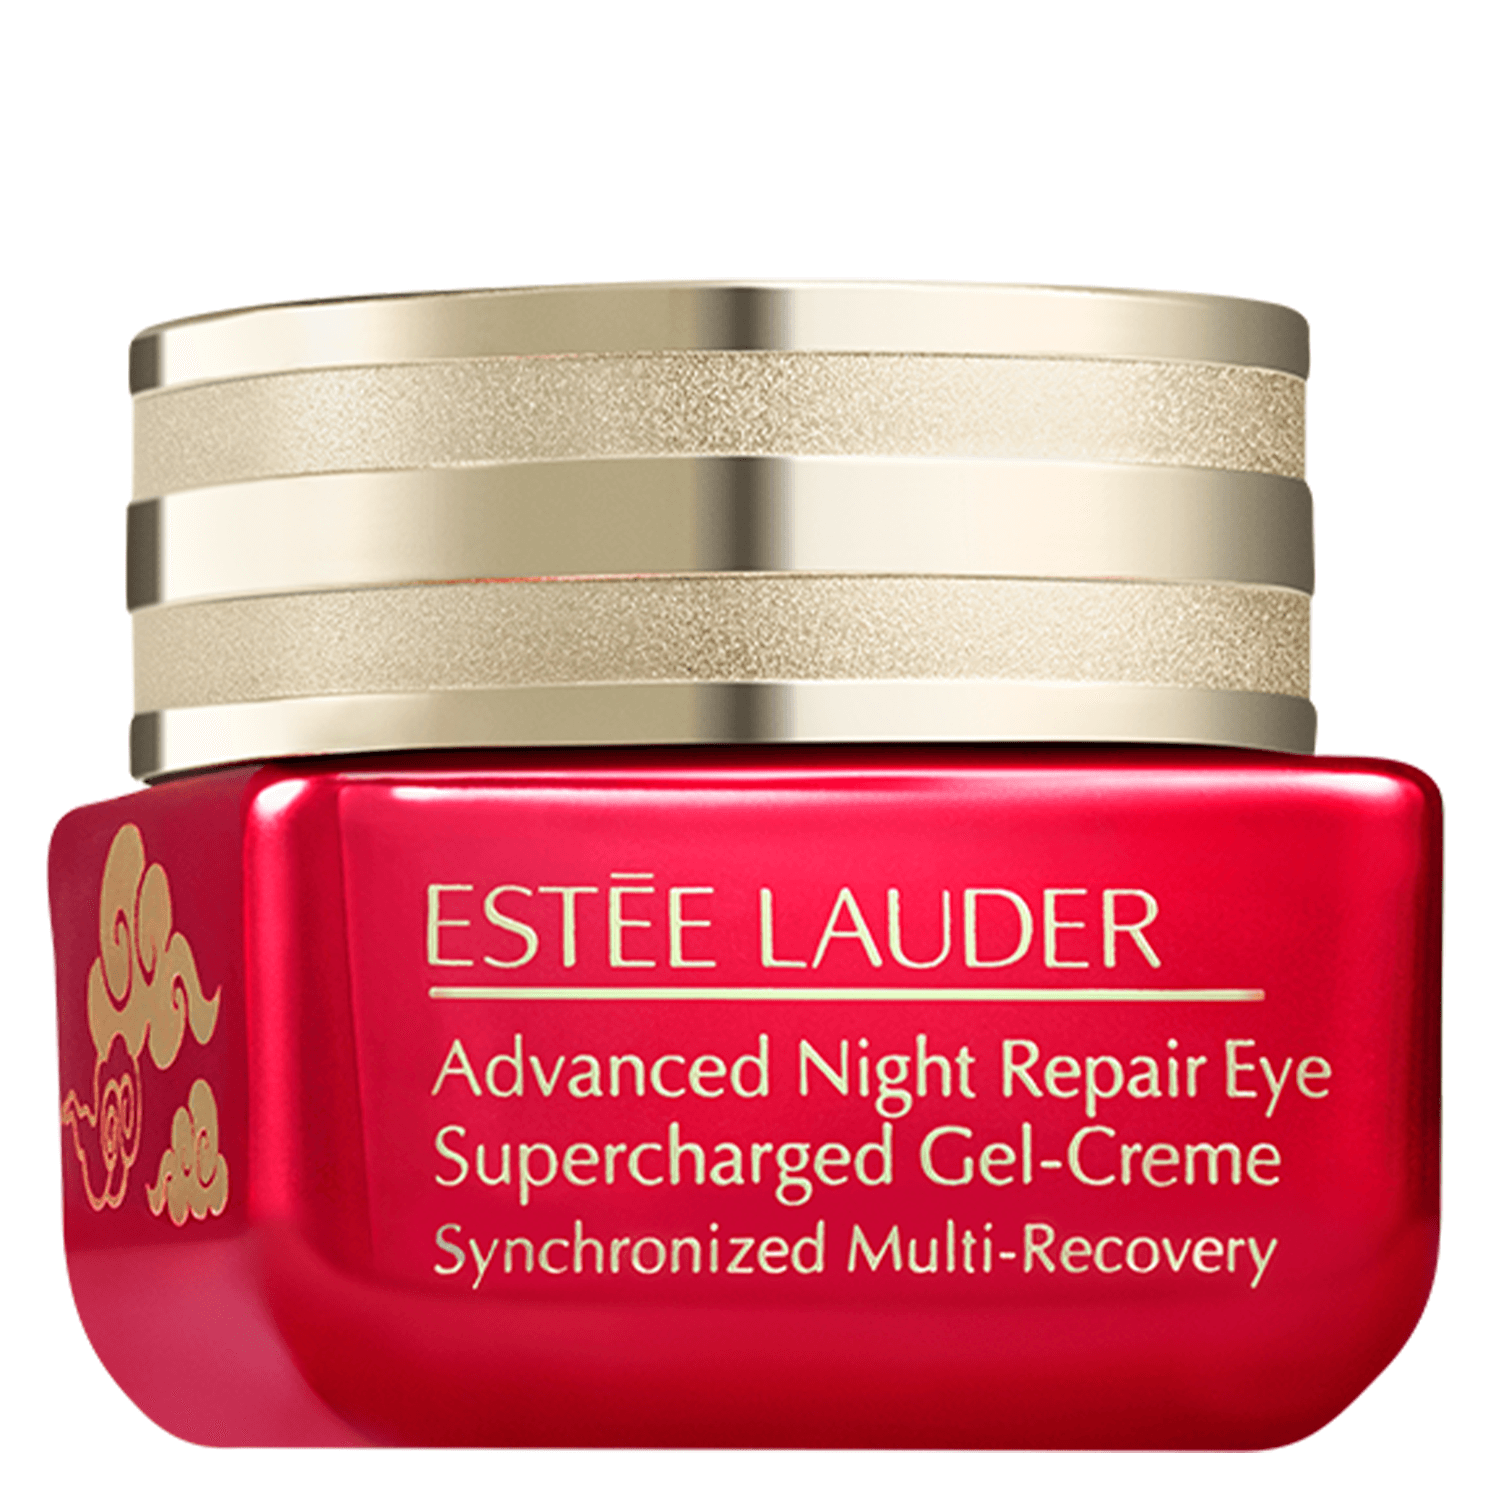 Product image from Advanced Night Repair Eye Supercharged Gel-Creme Limited Edition